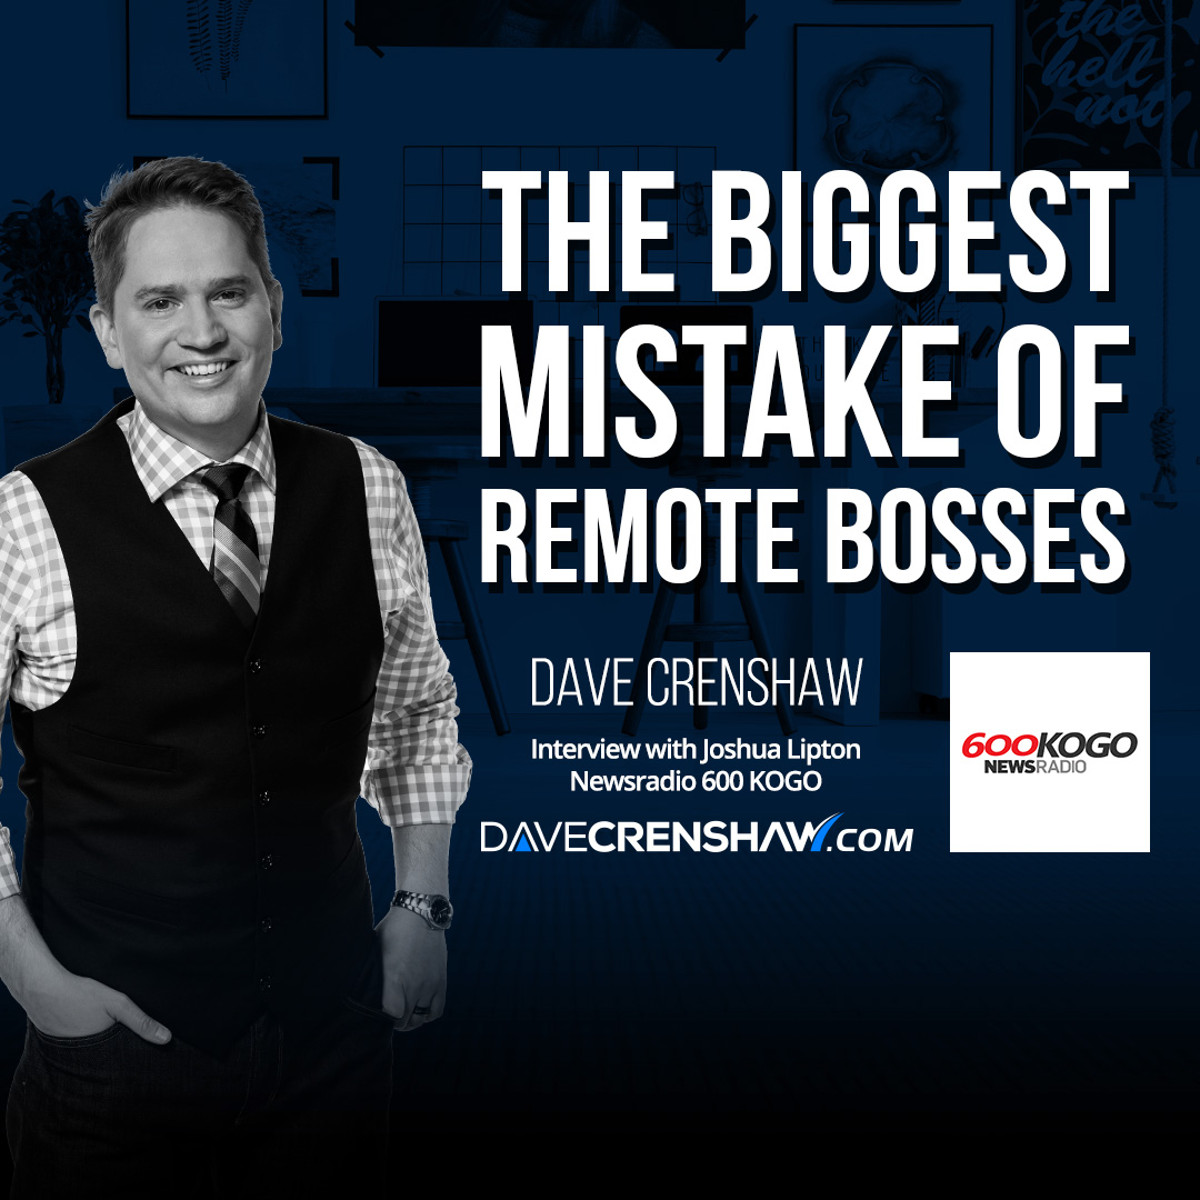 How to avoid the biggest mistake of remote bosses